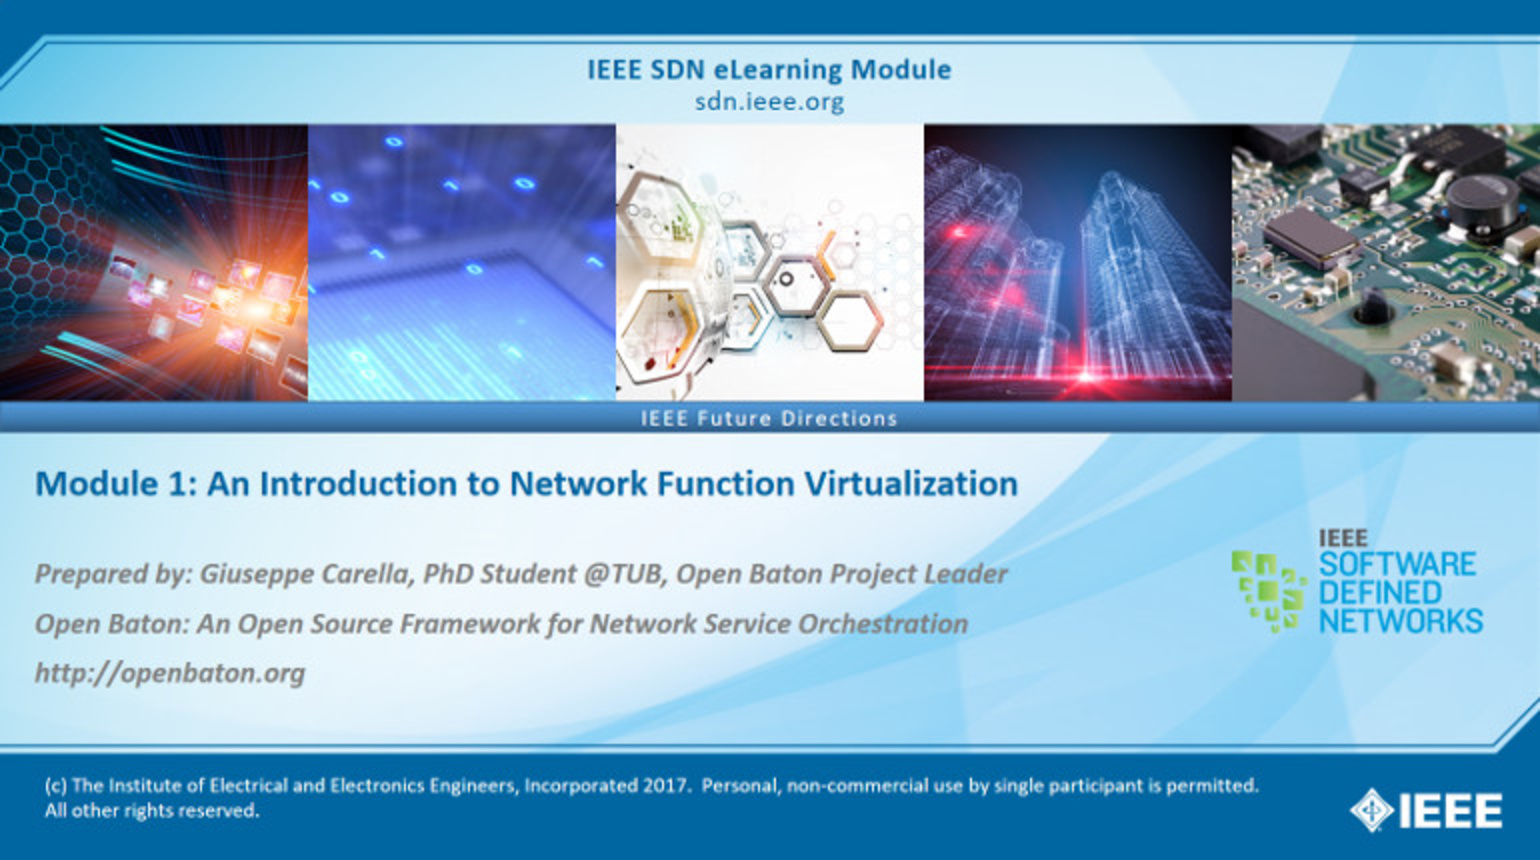 IEEE SDN: Open Baton Module 1 - An Introduction to Network Function Virtualization